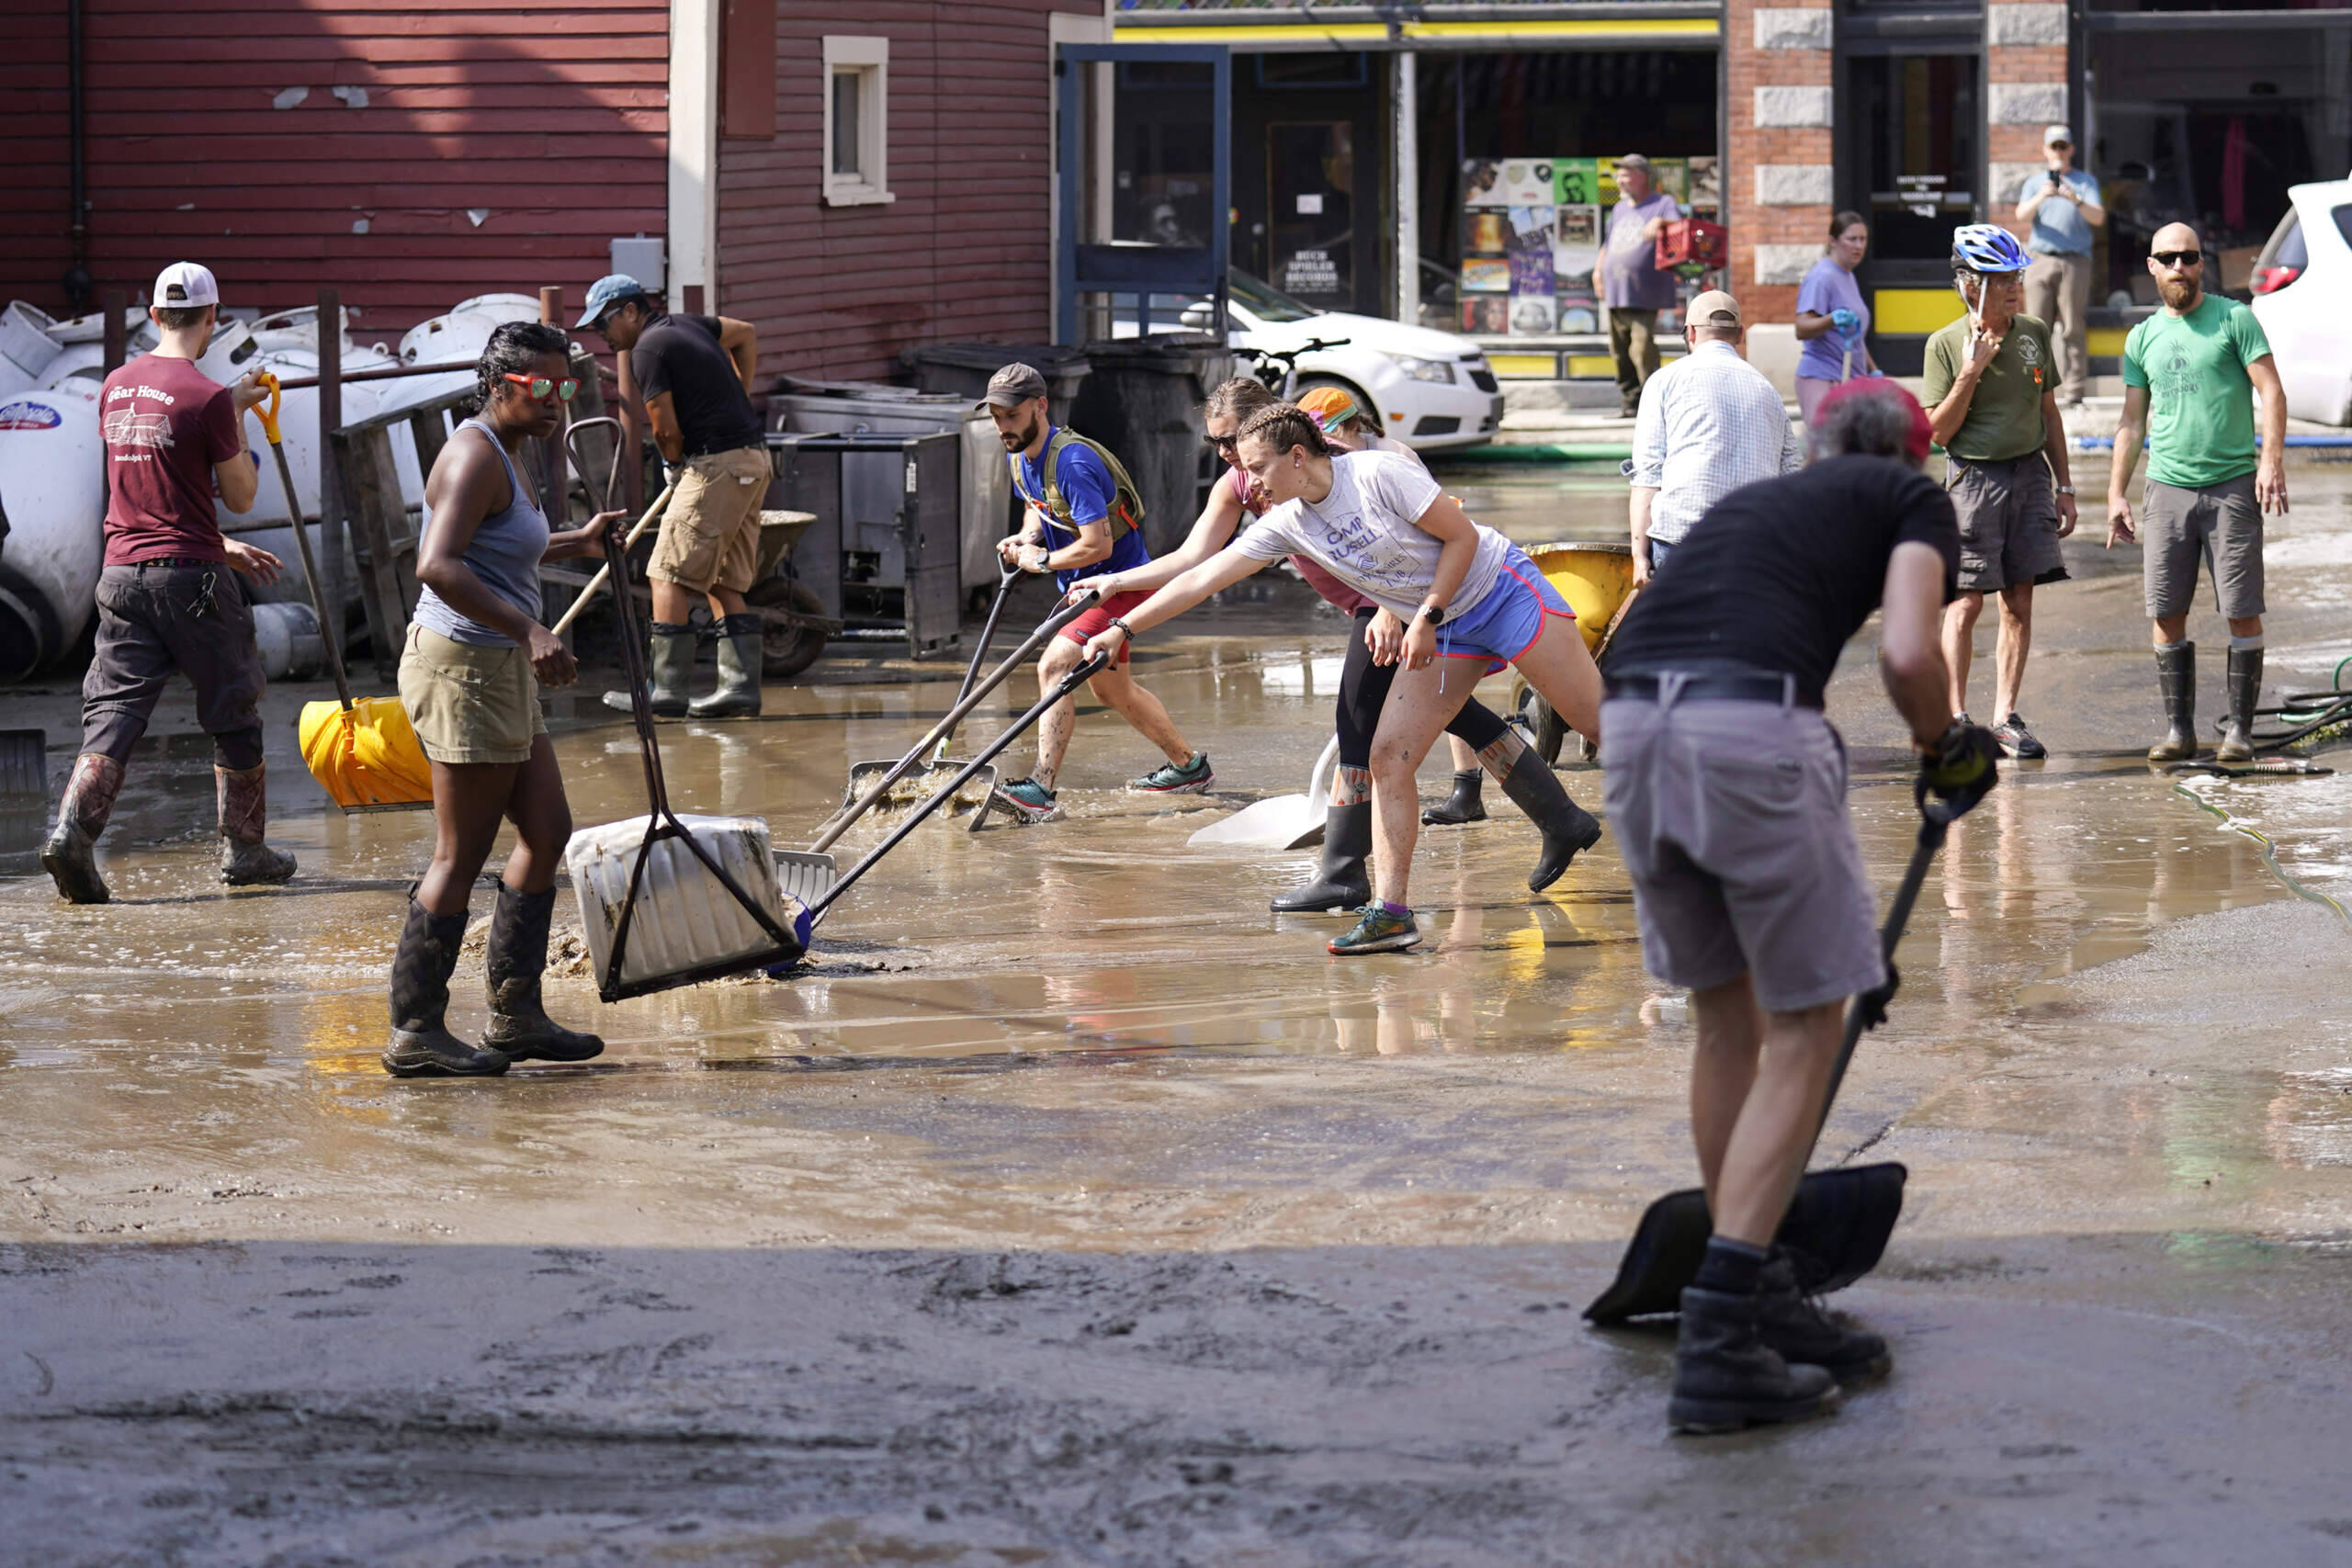 Volunteers clean up a downtown parking area on the banks of the Winooski River, Wednesday, July 12, 2023, in Montpelier, Vt. (Charles Krupa/AP)